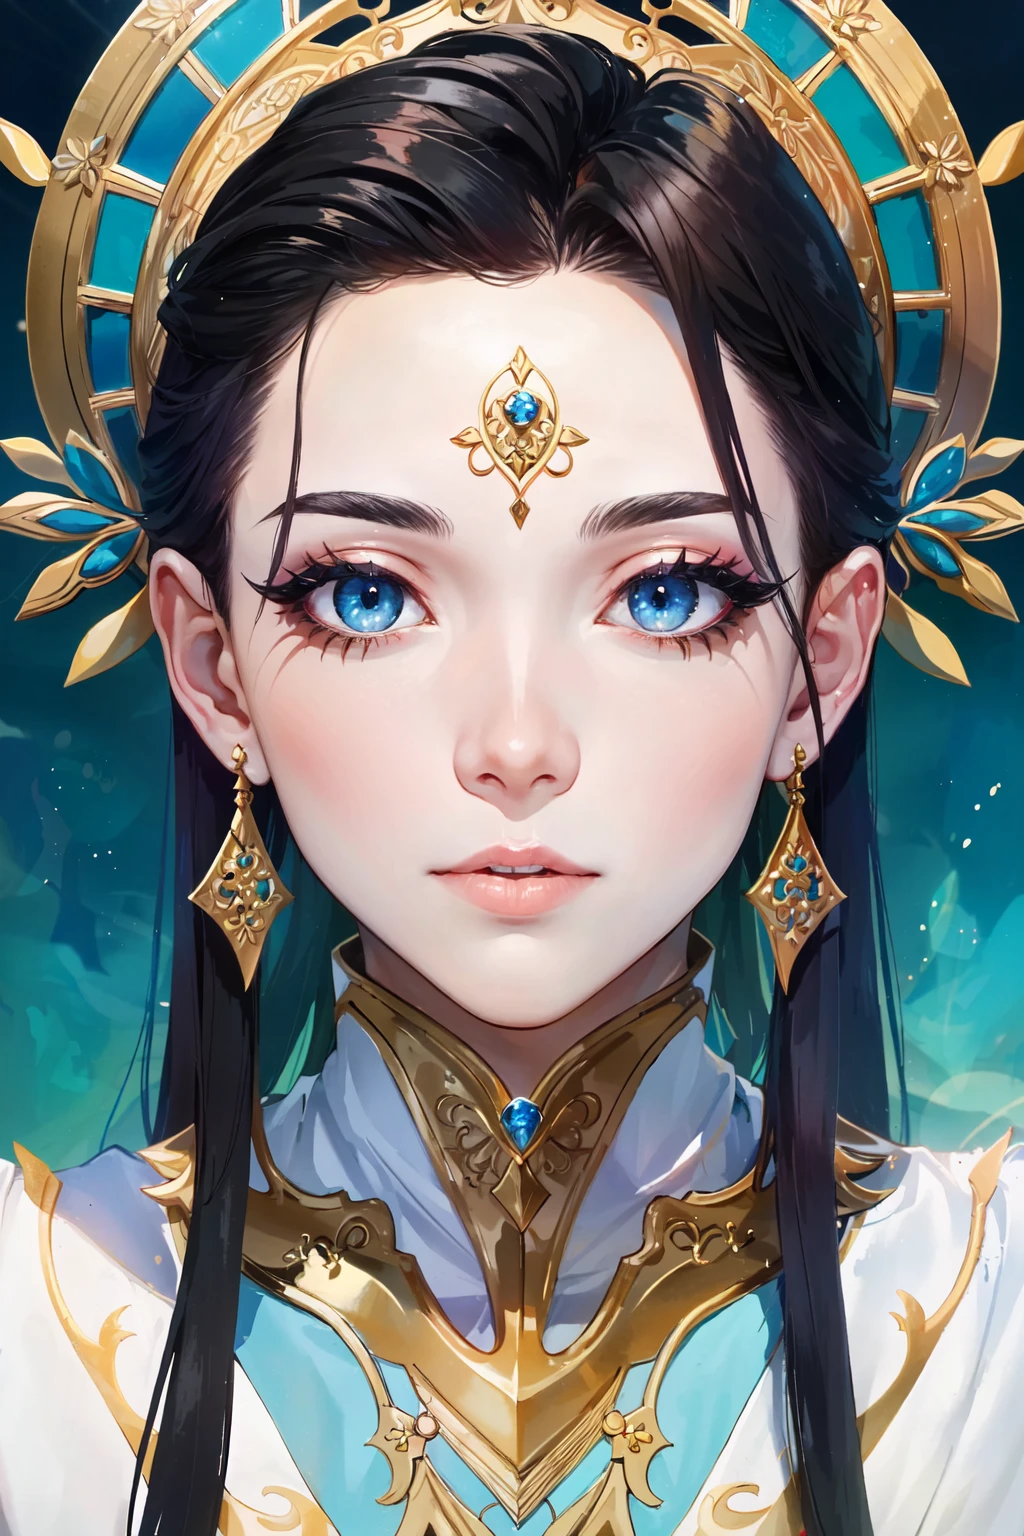 (masterpiece:1.2), (best quality:1.2), perfect eyes, perfect face, perfect lighting, (1boy:1.3), young noble boy, androgynous, long hair, gorgeous, thick eyelashes, makeup, earrings, rich clothes, colorful, fantasy, detailed outdoor city background